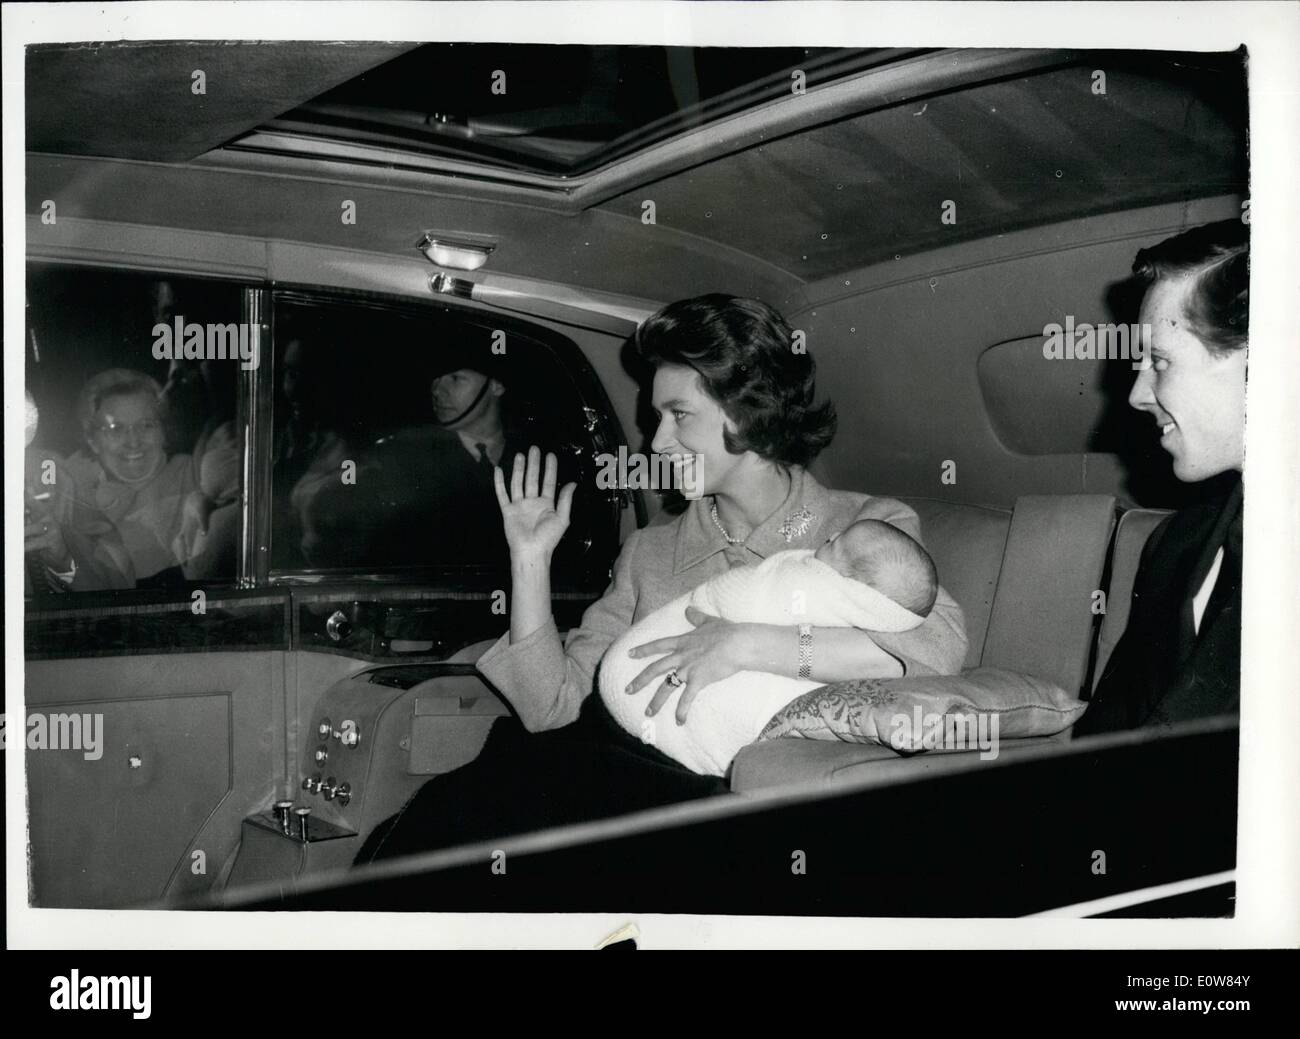 Nov. 11, 1961 - Princess Margaret and baby go home to Kensington Palace this afternoon: Princess Margaret and her 27-day-old son, Viscount Linley, returned home to Kensington Palace this afternoon. She had moved into Clarence House the night before the Royal baby was born. Photo shows Princess Margaret, holding Viscount Linely, with the Earl of Snowdon leaving Clarence House by car this afternoon. Stock Photo